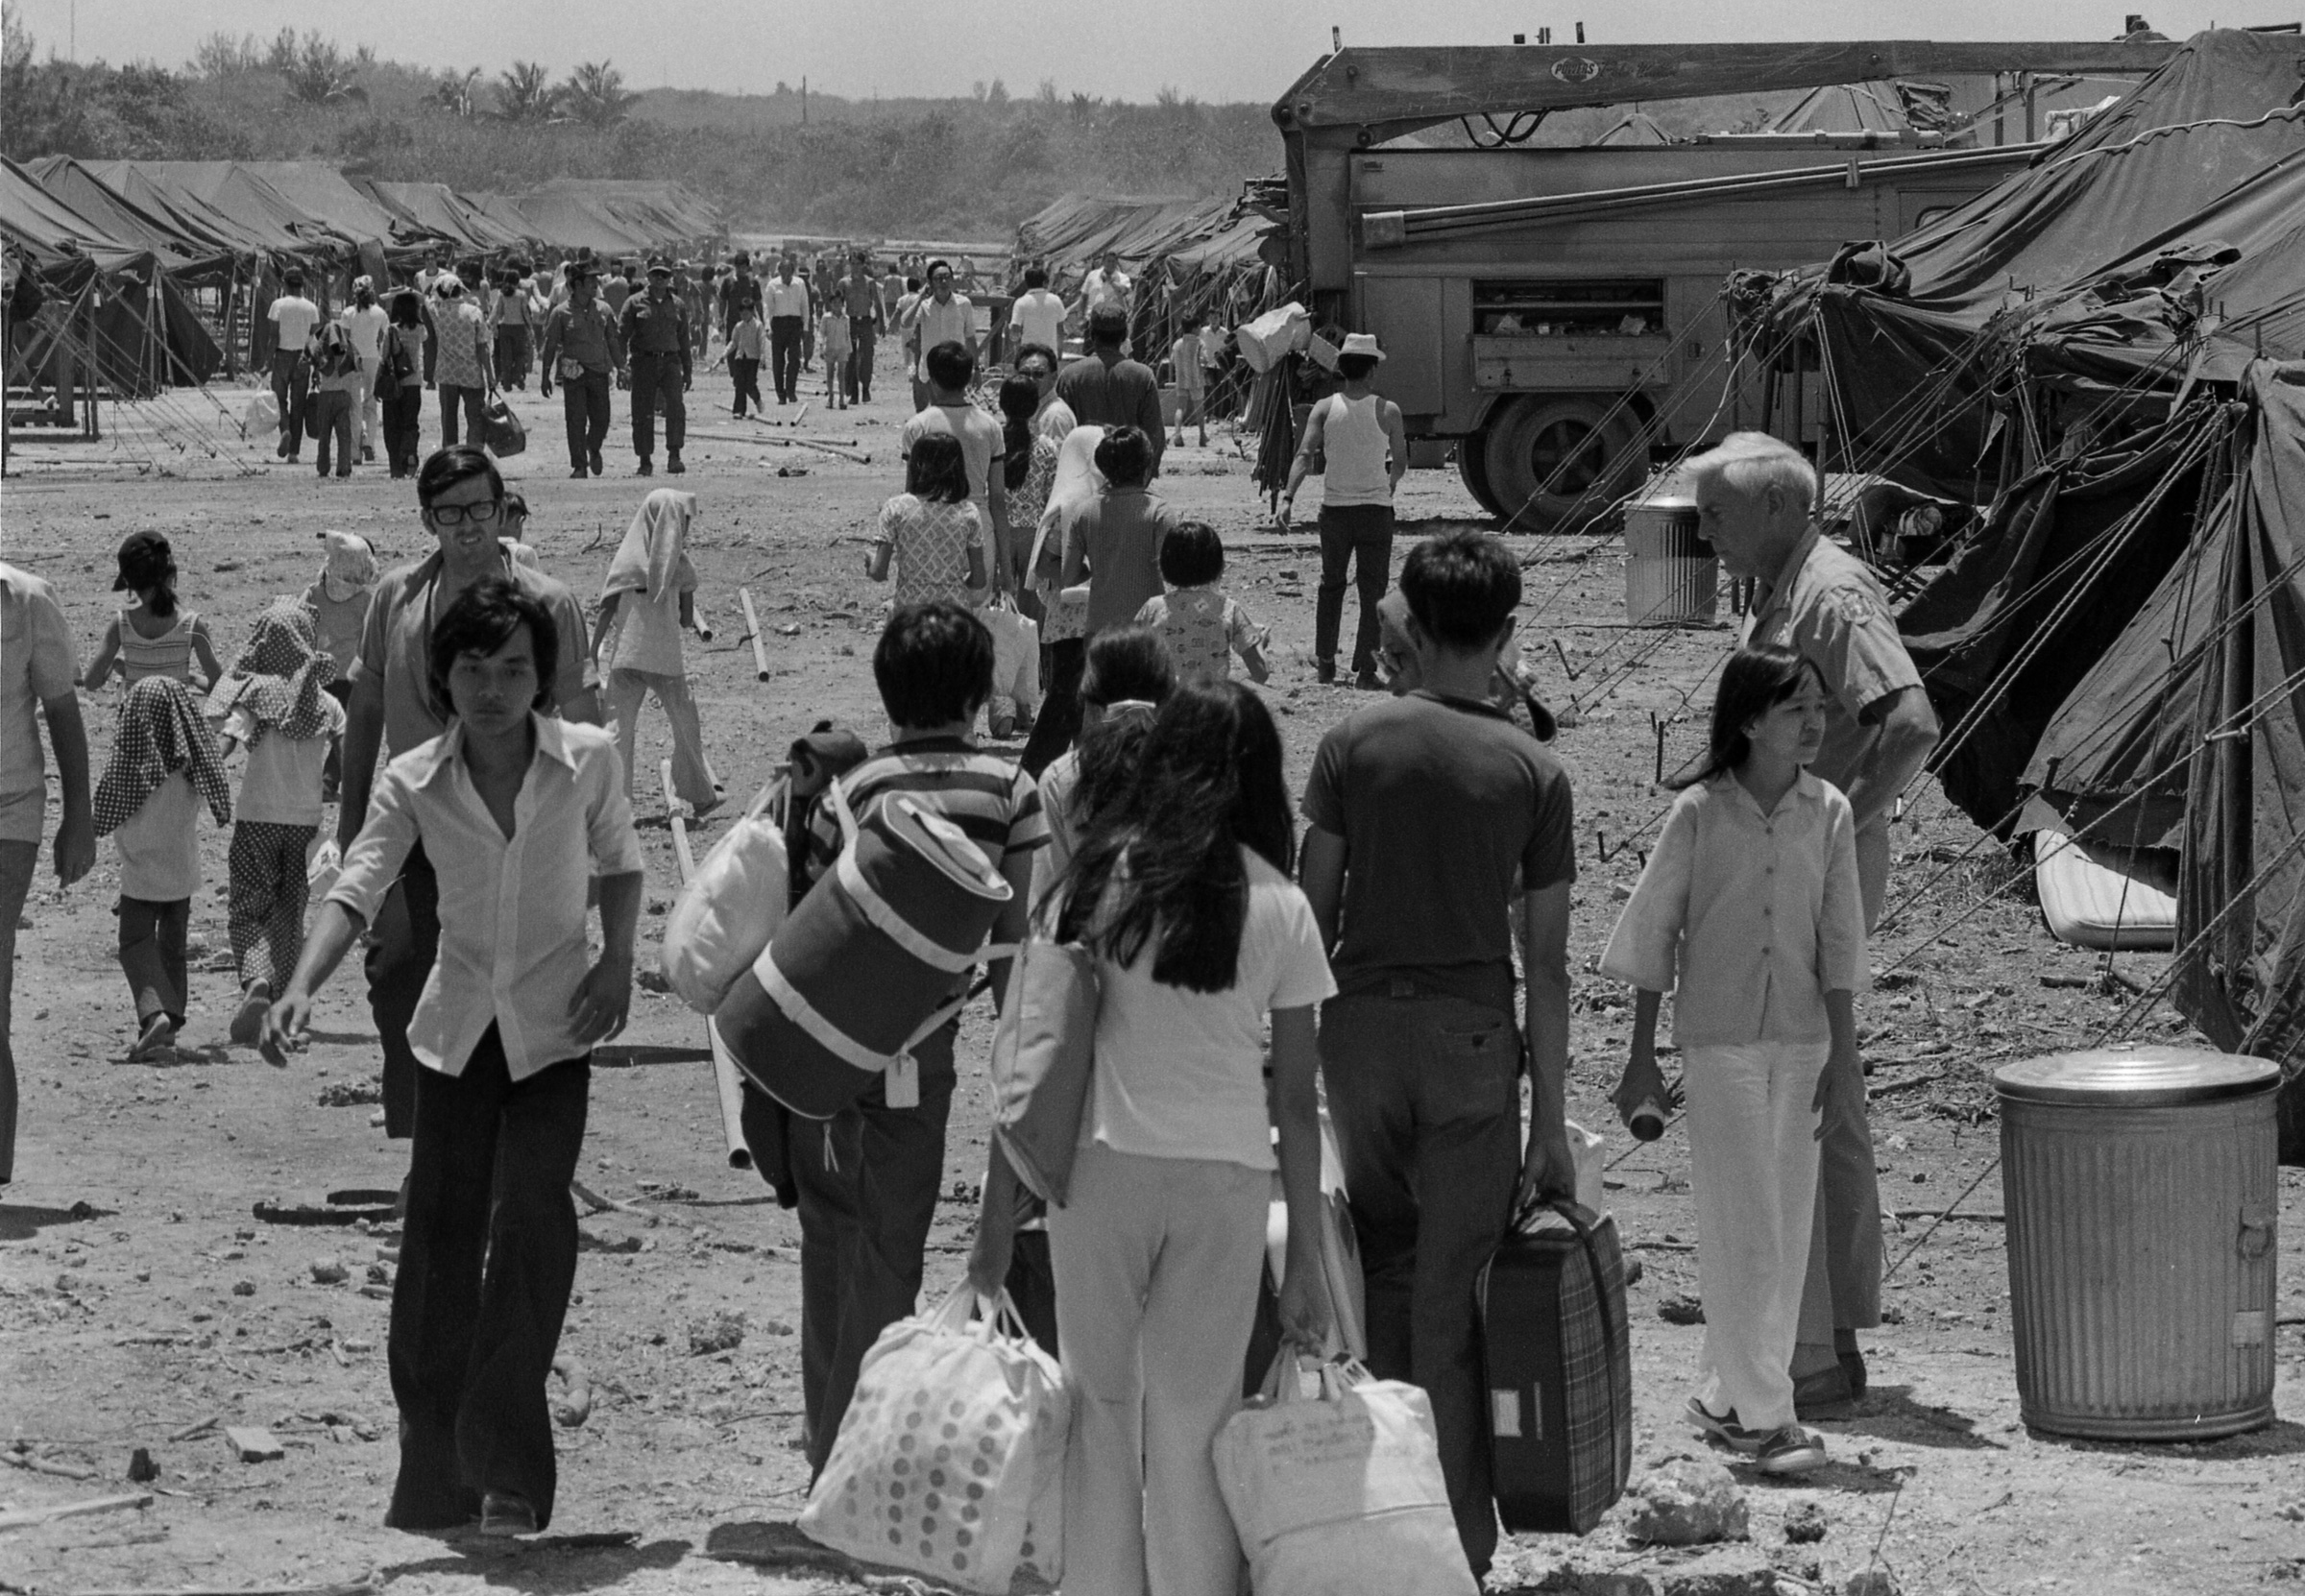 More than 3,000 refugees from South Vietnam enter the camp at Crote Point in Guam Naval Base after they were shifted from Clark Air Base in the Philippines, April 26, 1975.